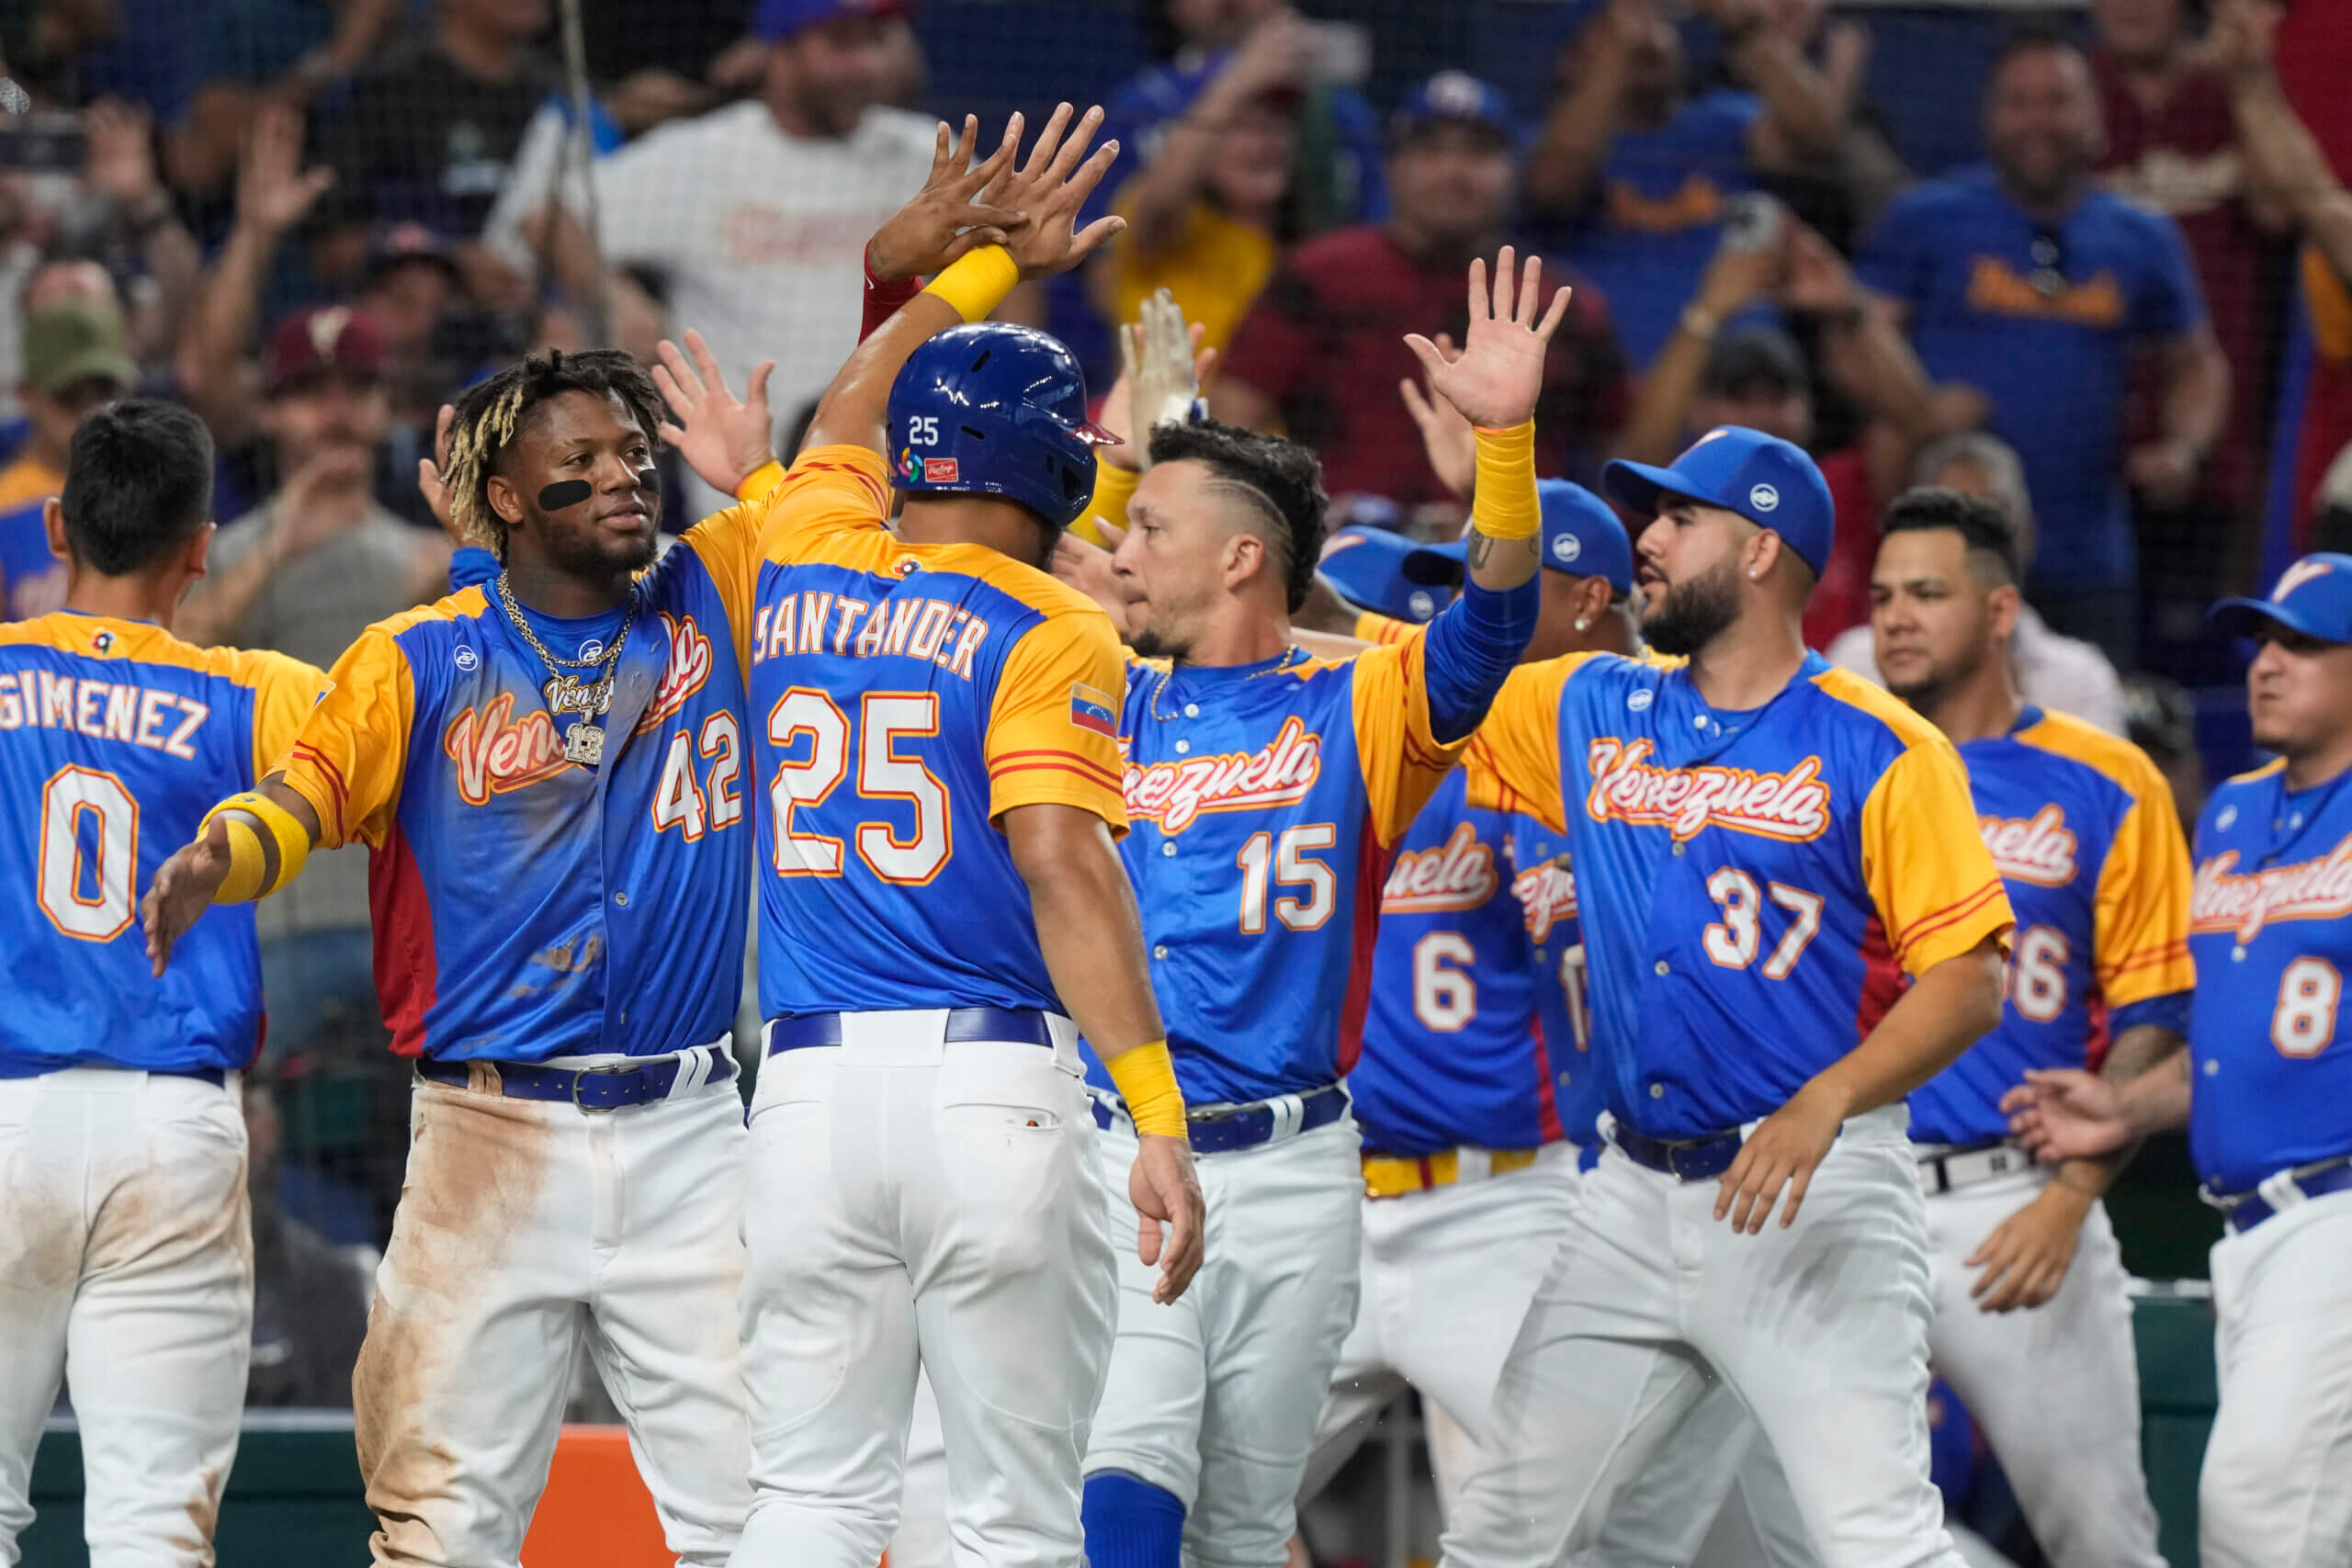 USA Baseball roster for 2023 World Baseball Classic: Which Mets